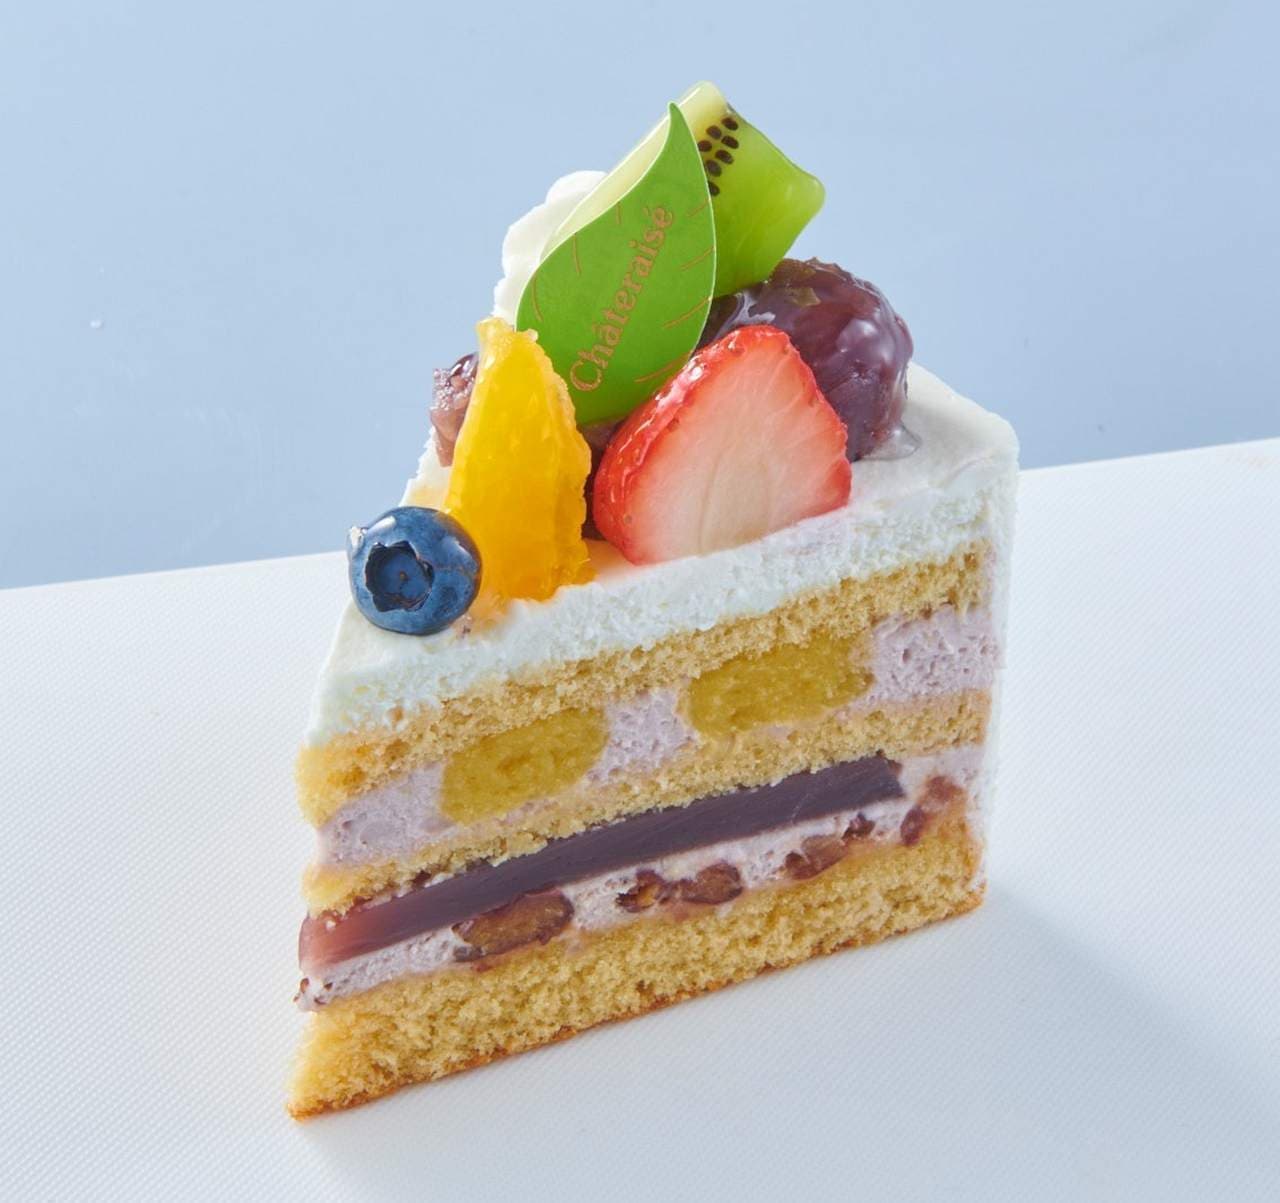 Chateraise "Respect for the Aged Day Azuki and Chestnut Shortcake"